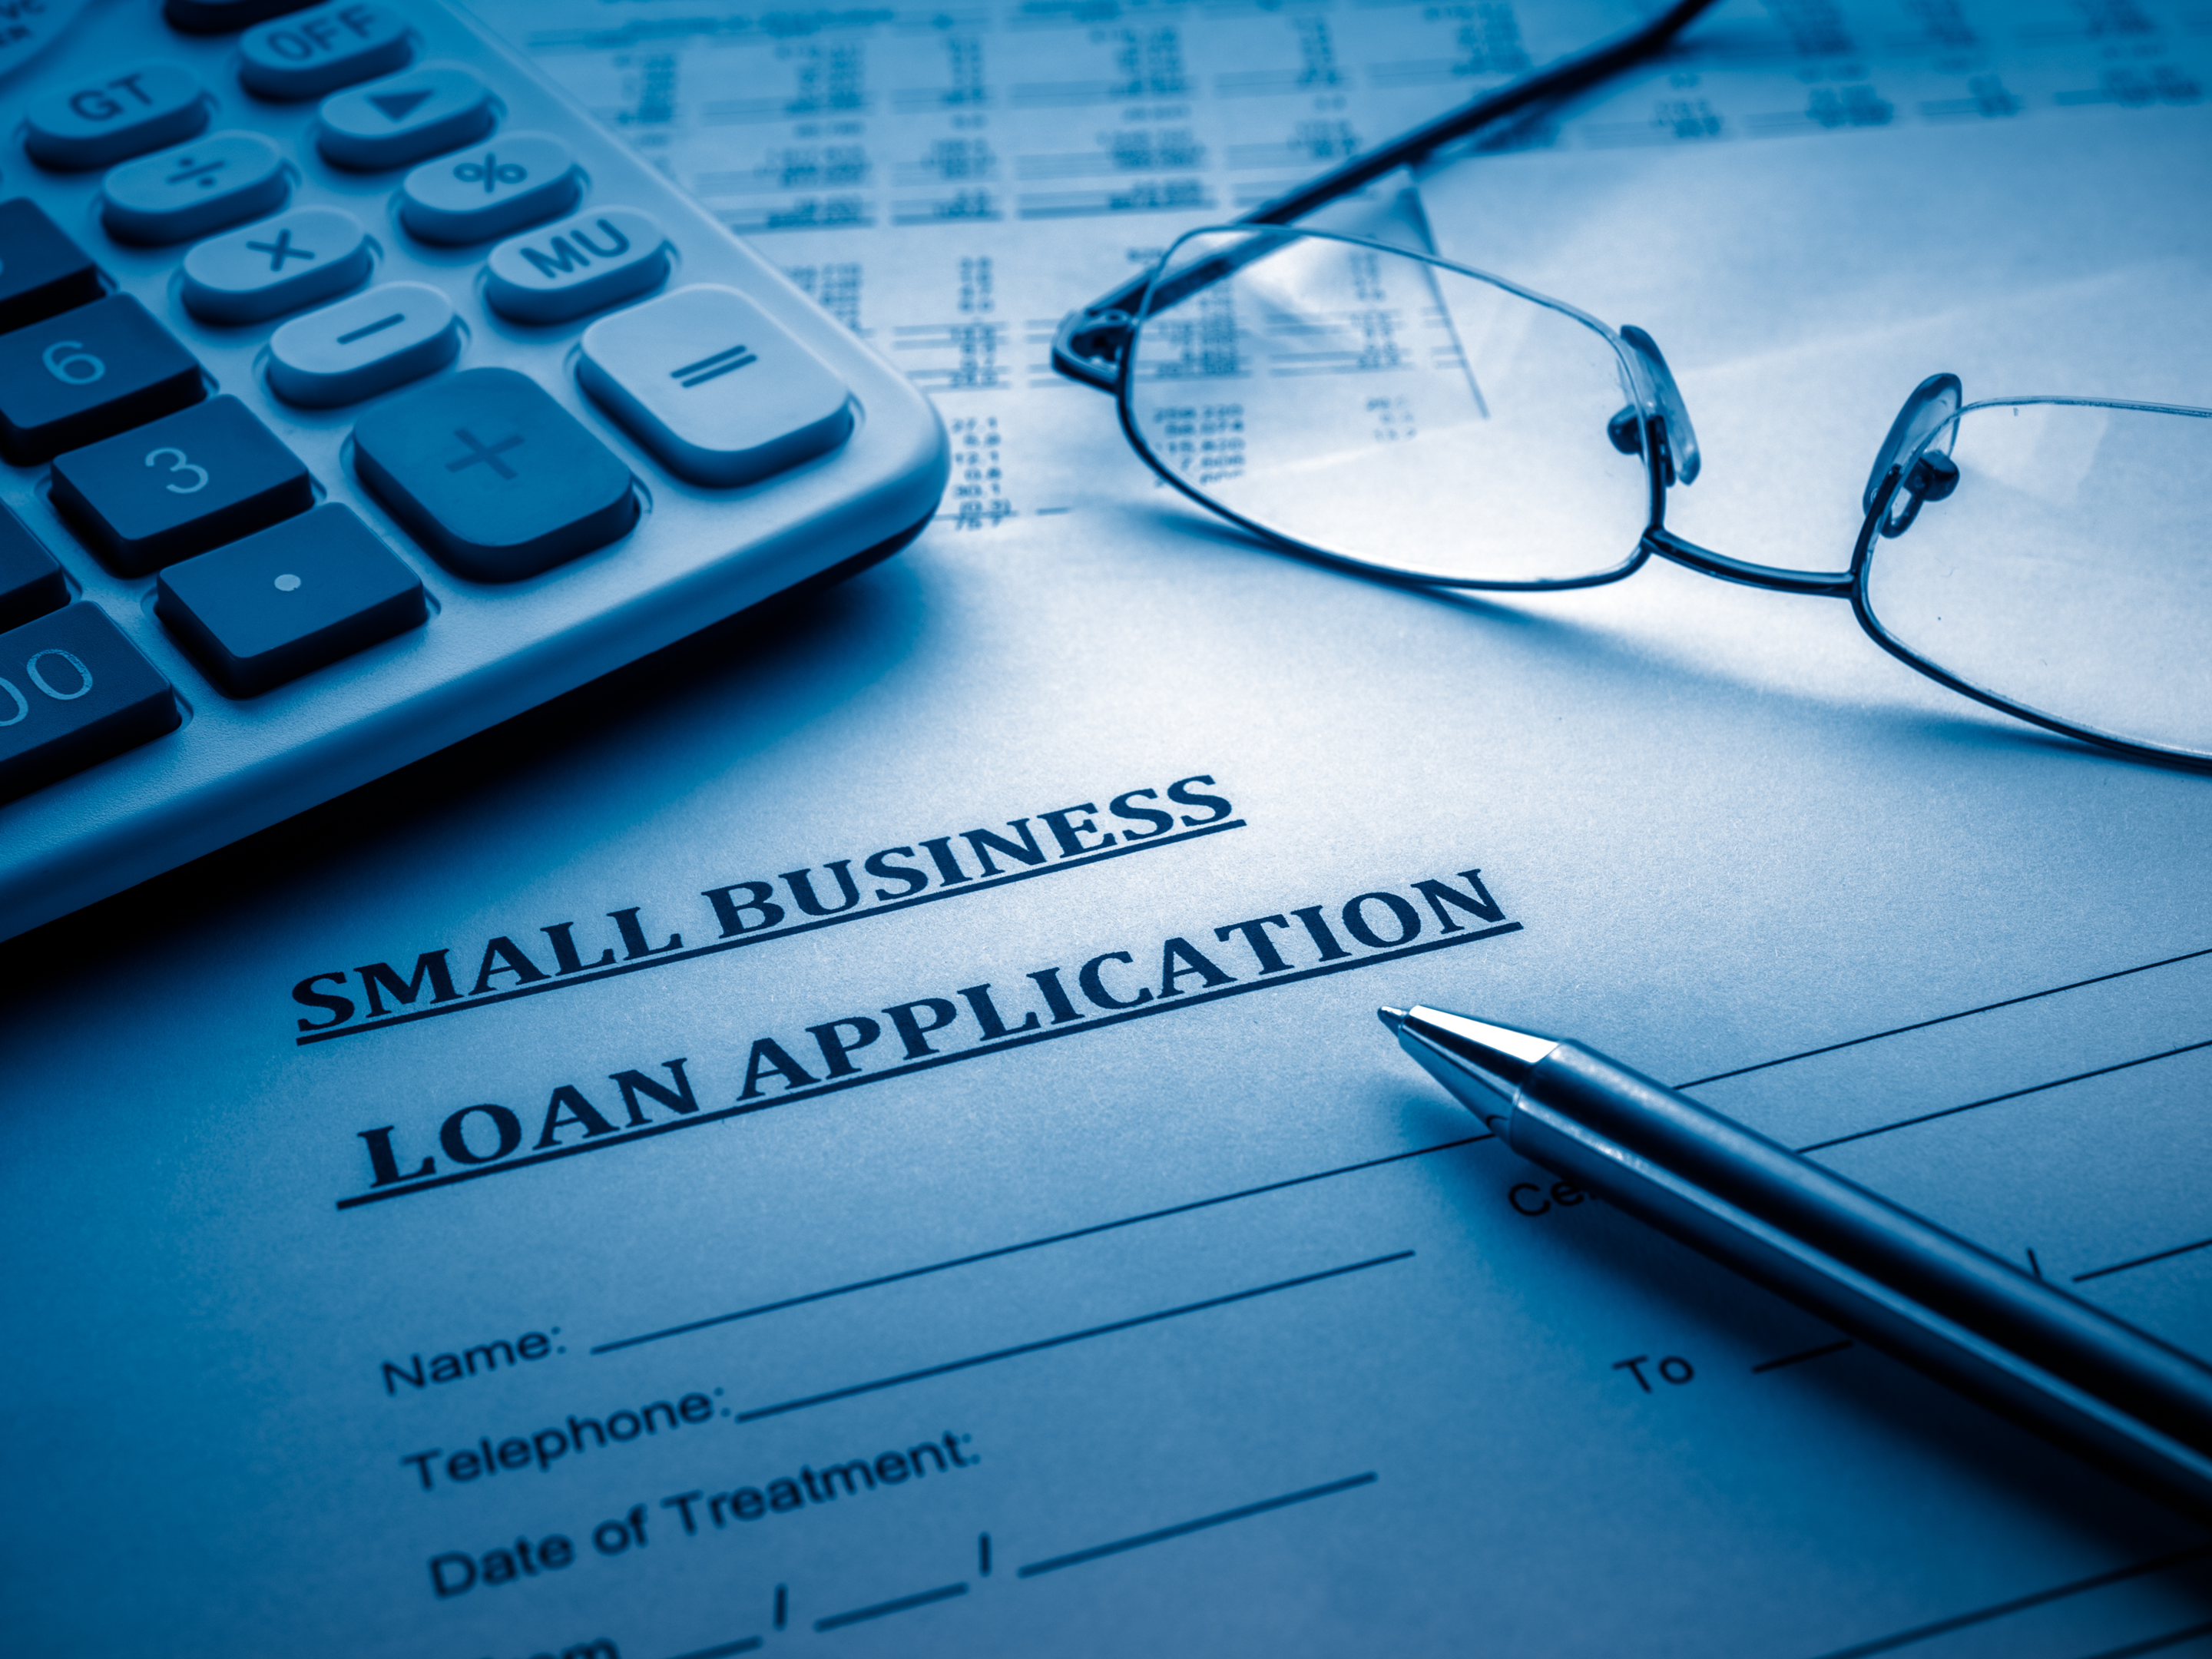 Applying for a business loan is different than applying for personal loans.